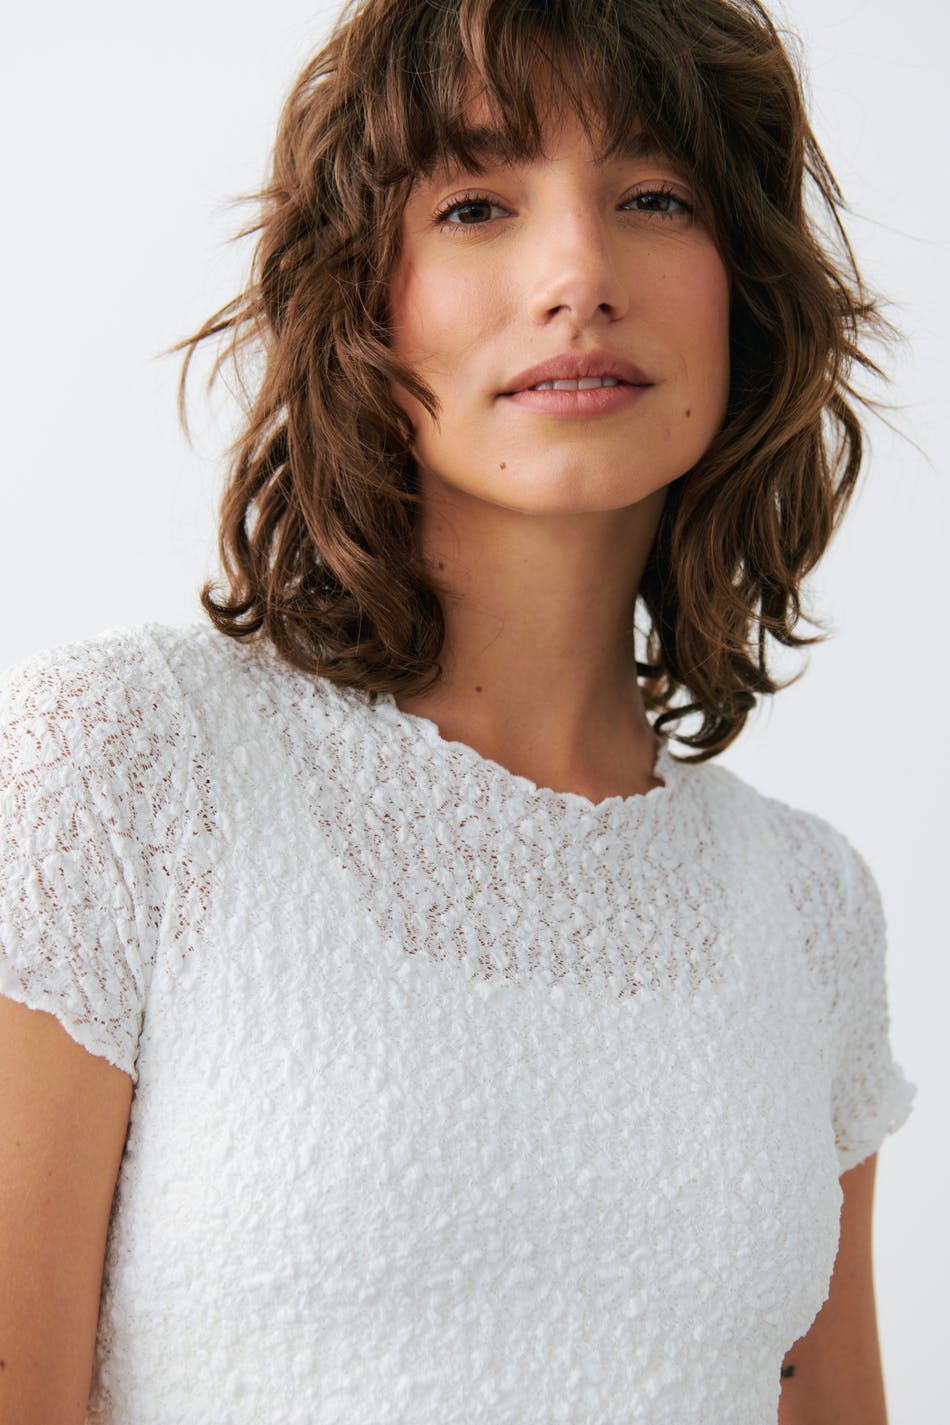  White Lace Short Sleeve Top